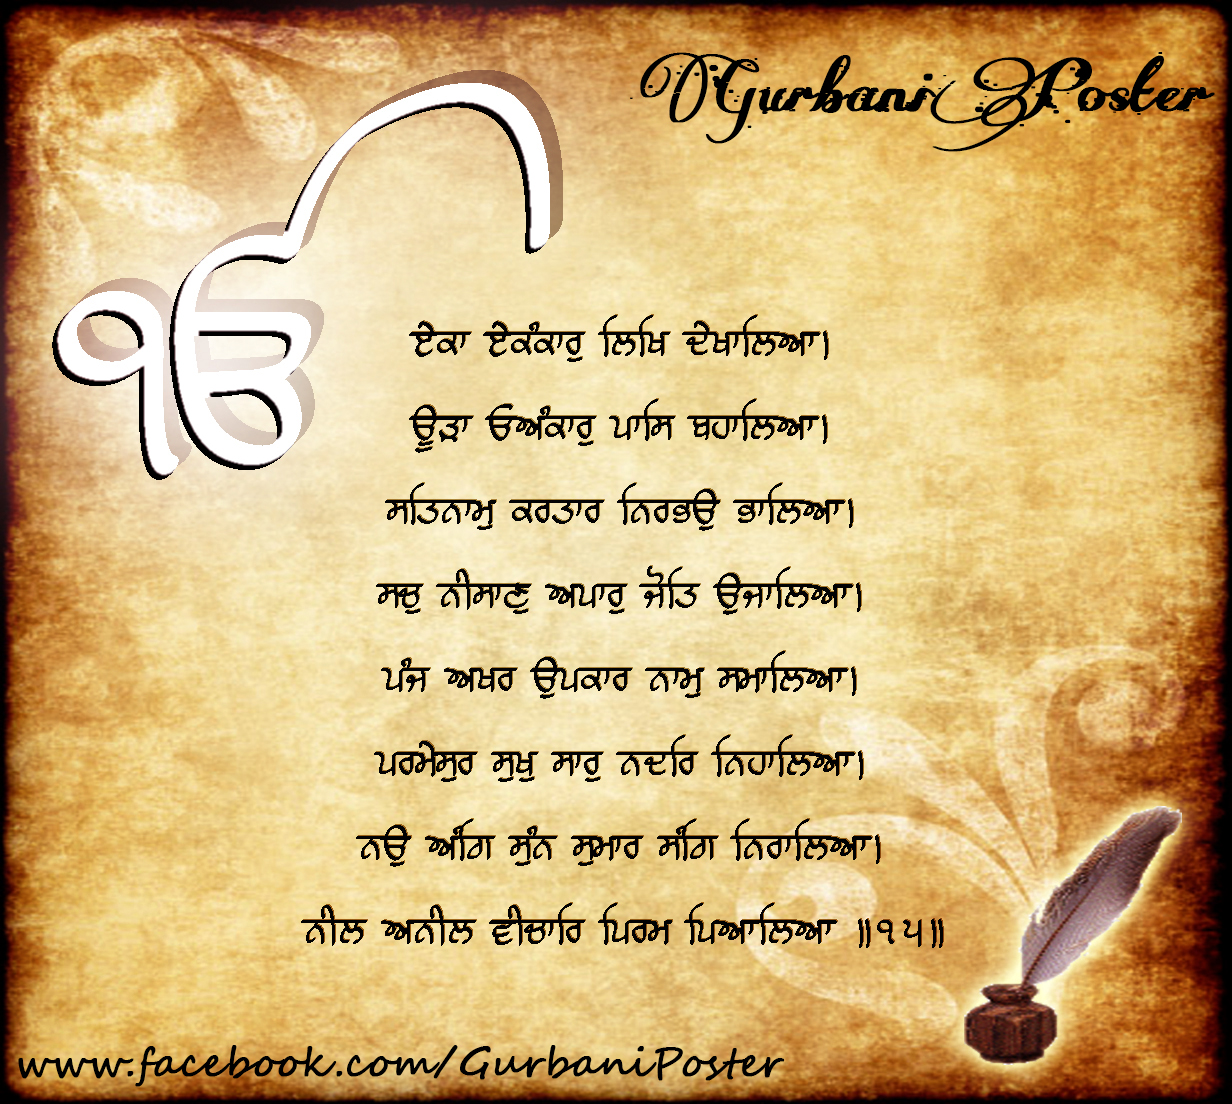 Ik Onkar- Gurbani Poster - Get Well Letter For A Father In Law - 1232x1104  Wallpaper 